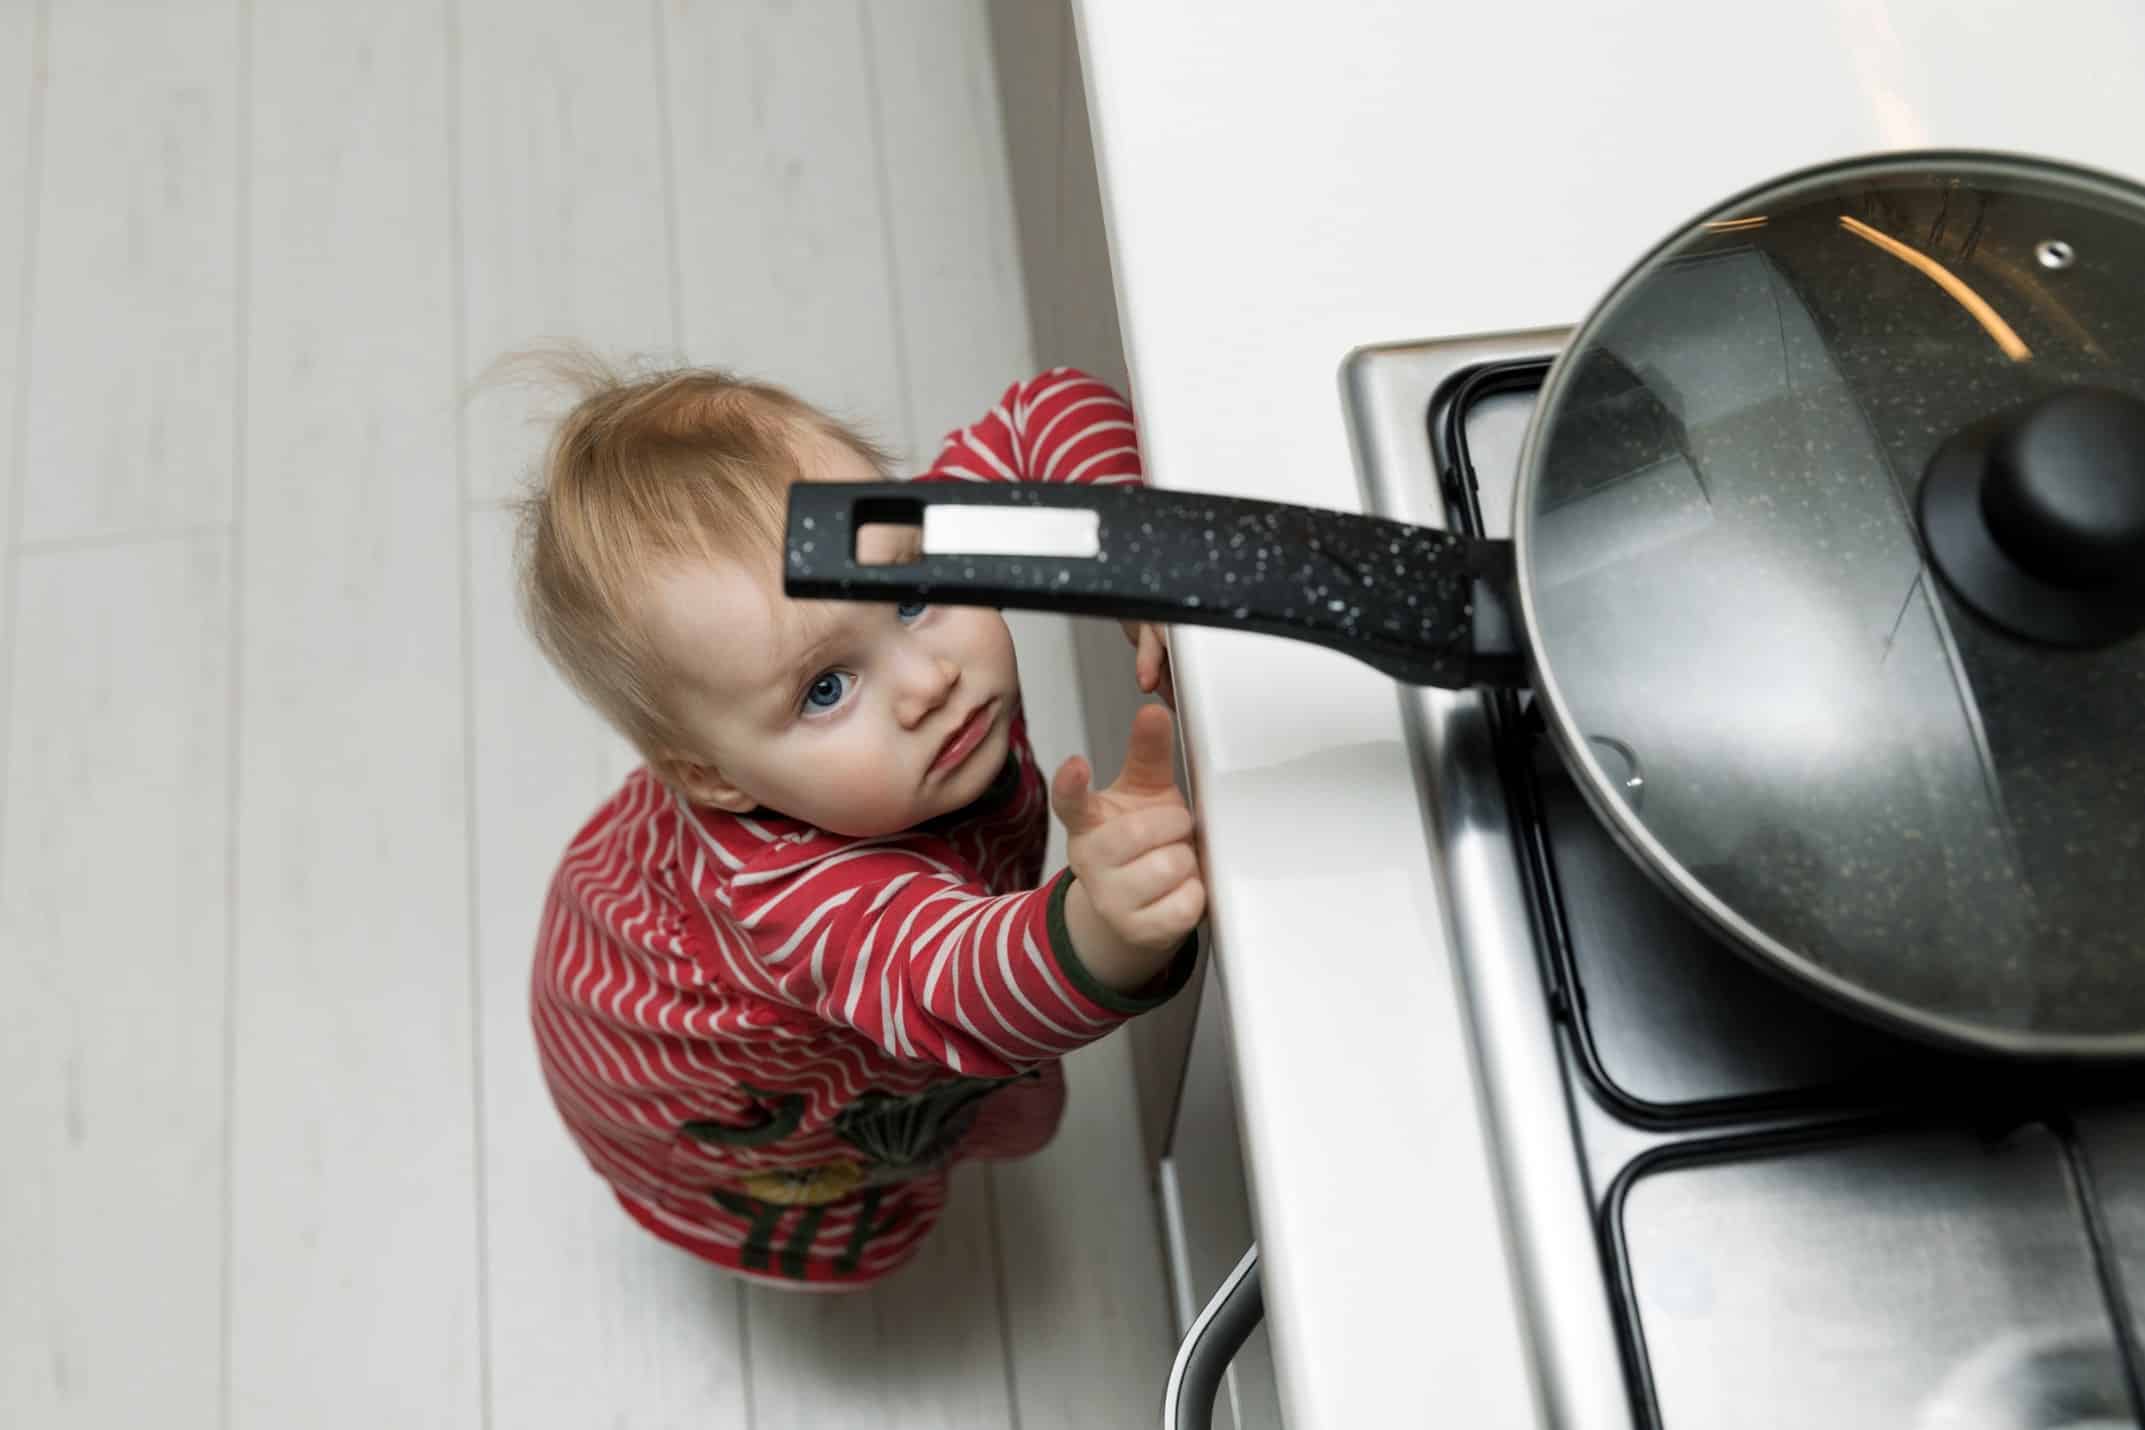 A toddler reaching for a pan on a stove